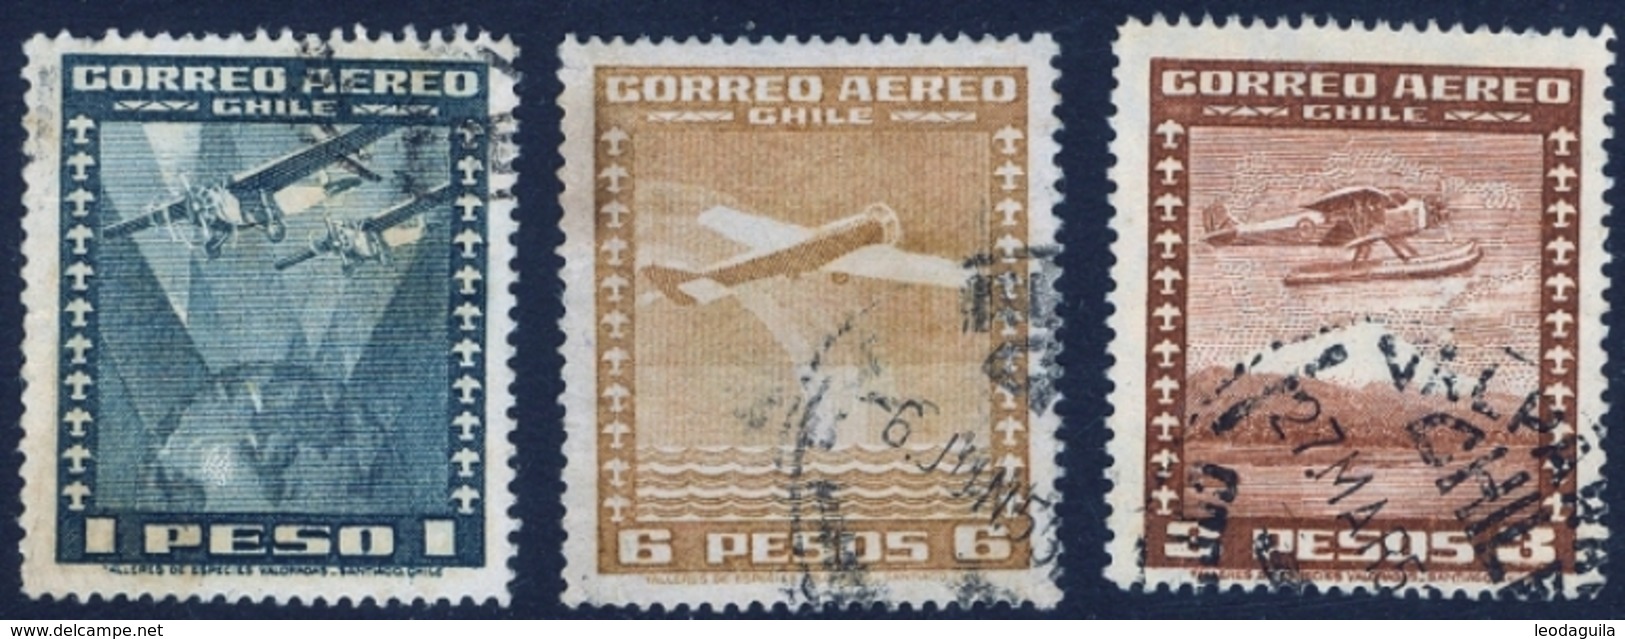 CHILE #208-10   -  AIRPLANES - AIRMAIL  1934 - USED - Chile